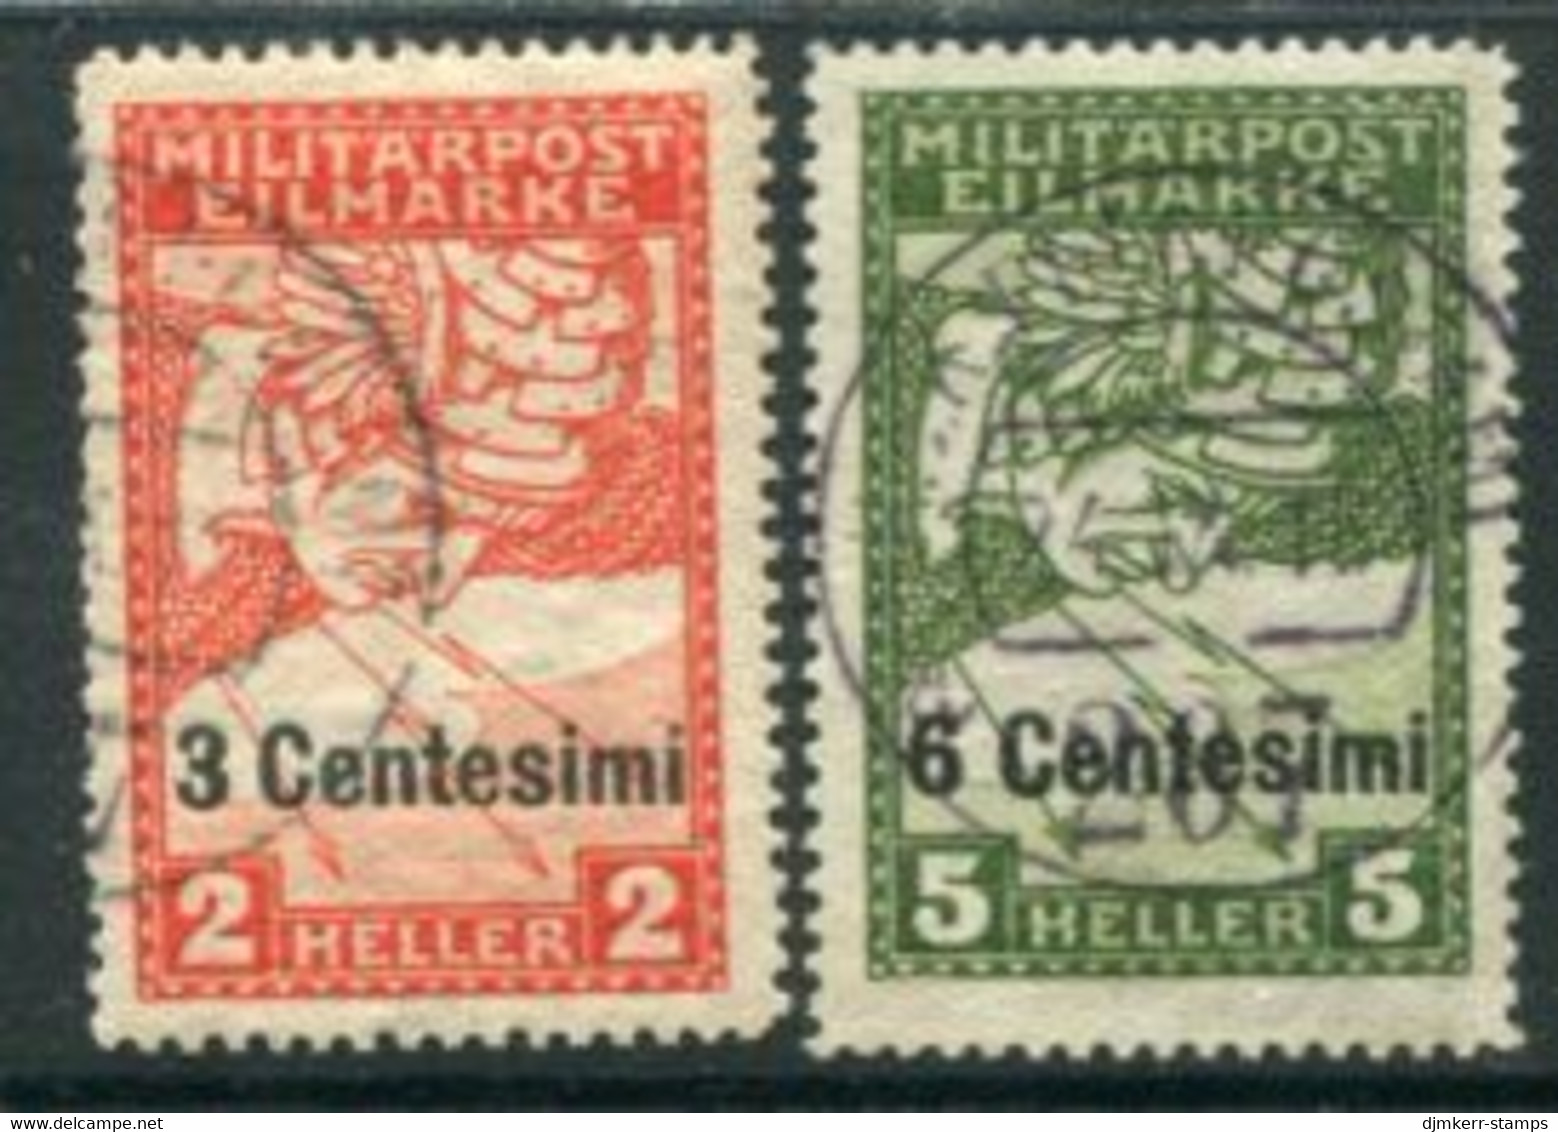 AUSTRIAN FELDPOST In ITALY 1917 Overprint On Newspaper Express Stamps. Used.  Michel 24-25 - Usados